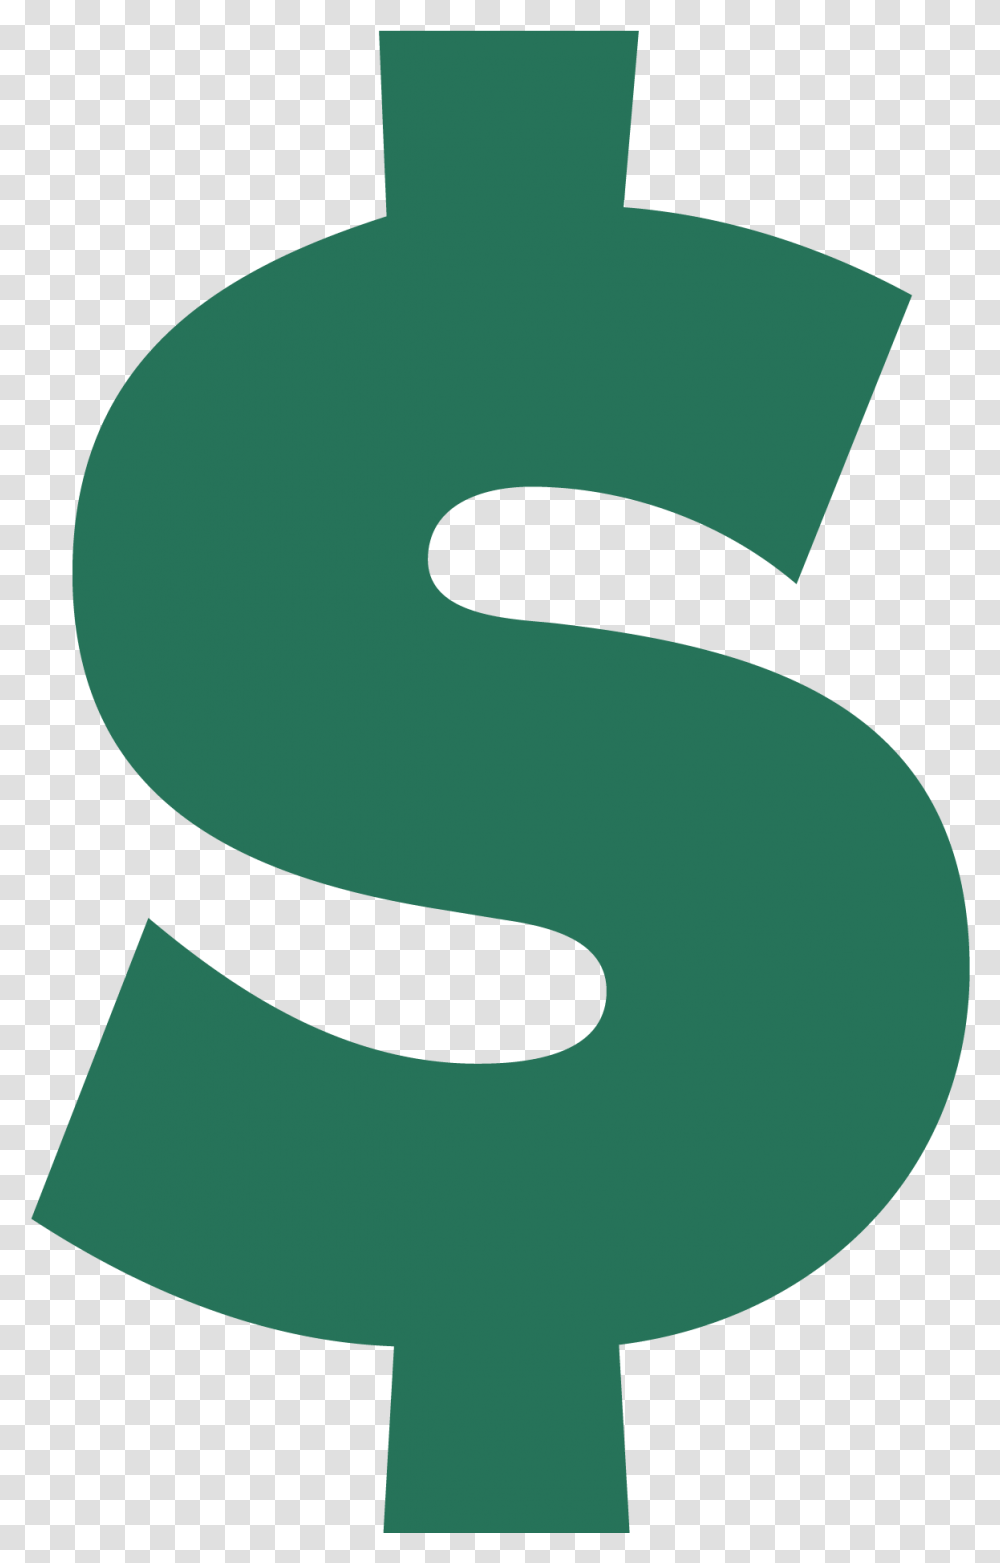 High Res Image Of Dollar Sign, Number, Recycling Symbol Transparent Png